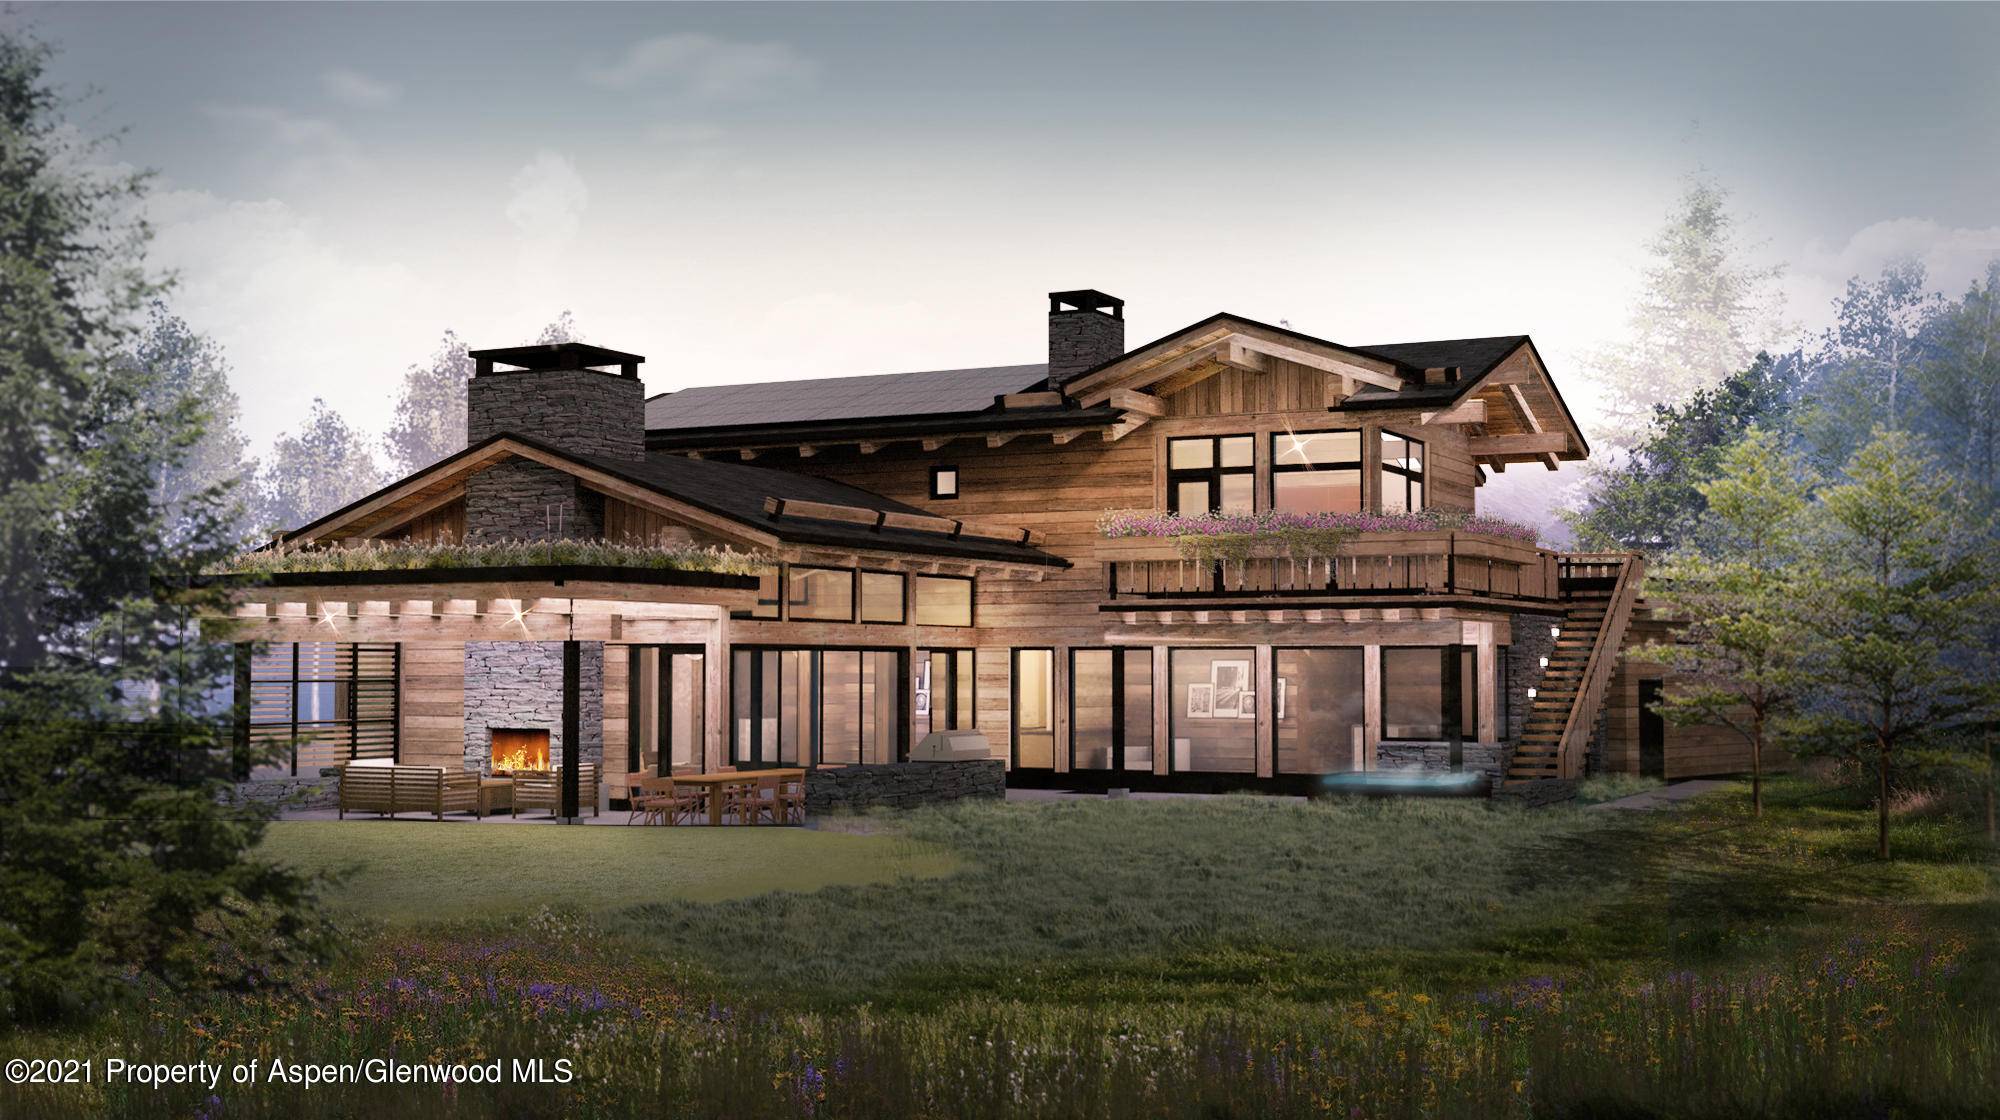 Stunning 5 bedroom 8 bath new construction created by Alpinist Ventures just moments from all four ski mountains, Maroon Creek and Aspen golf courses and steps to the Moore open ...